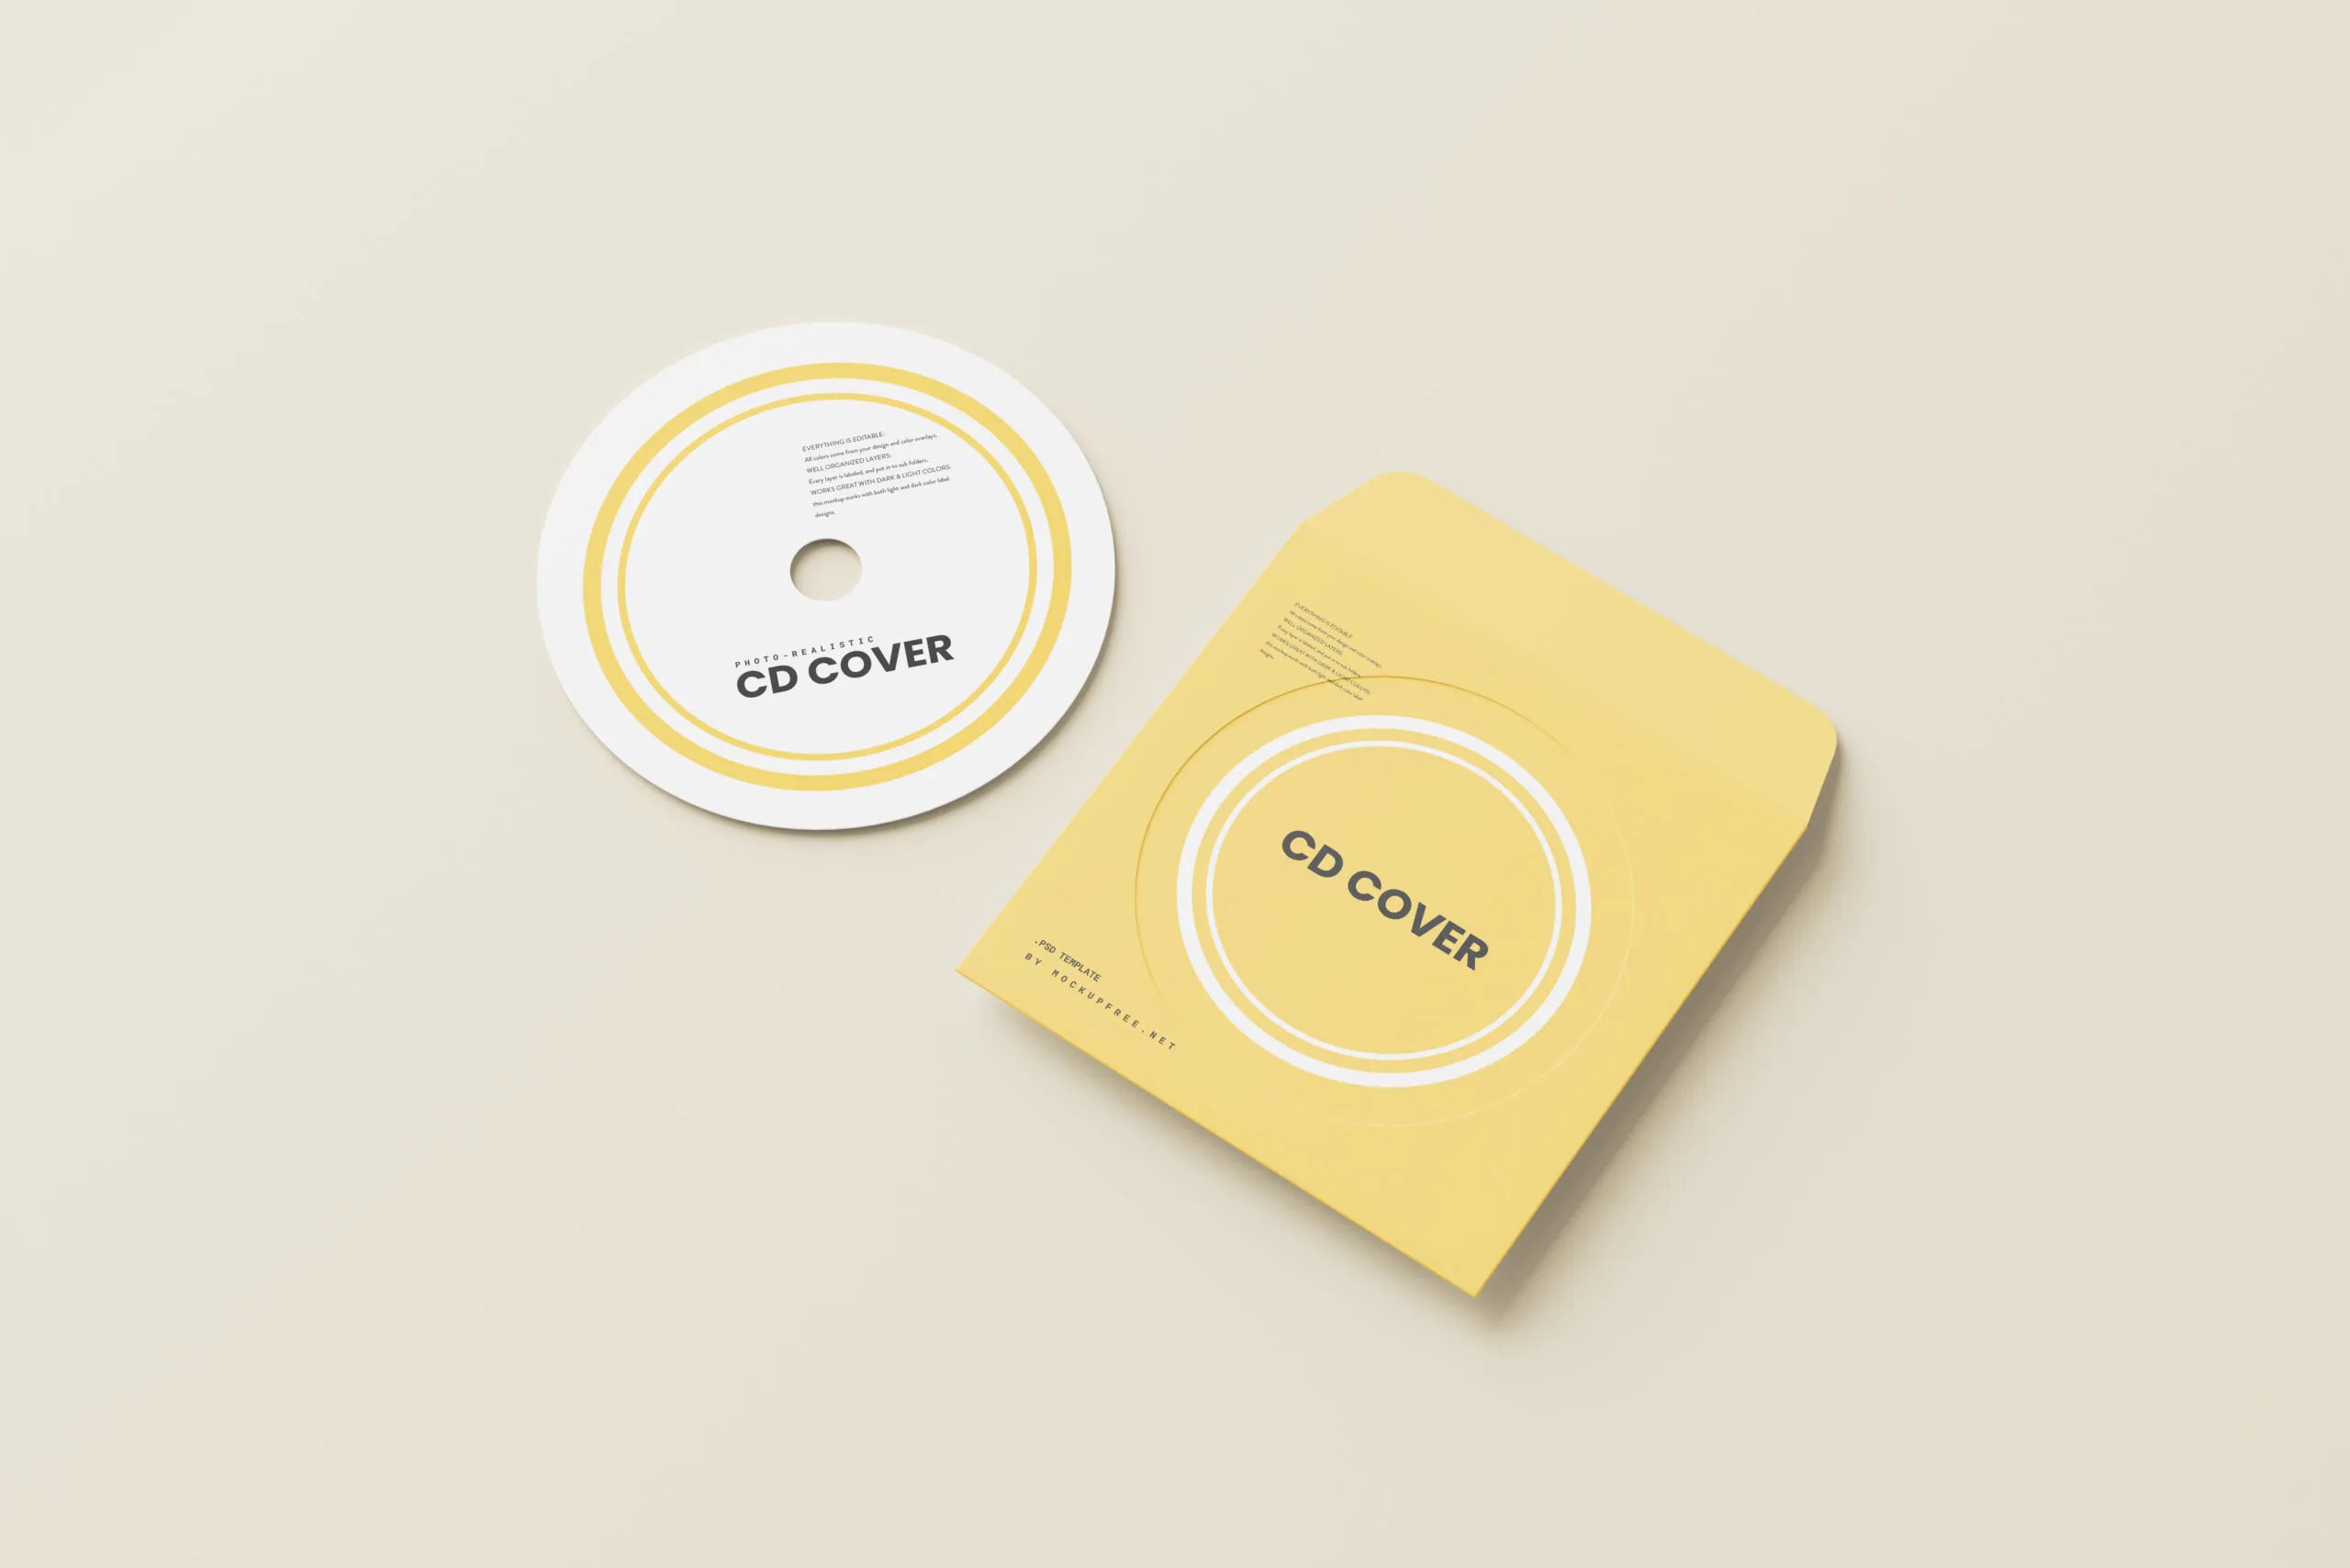 5 Paper CD Cover and Disc Mockups in Different Visions FREE PSD